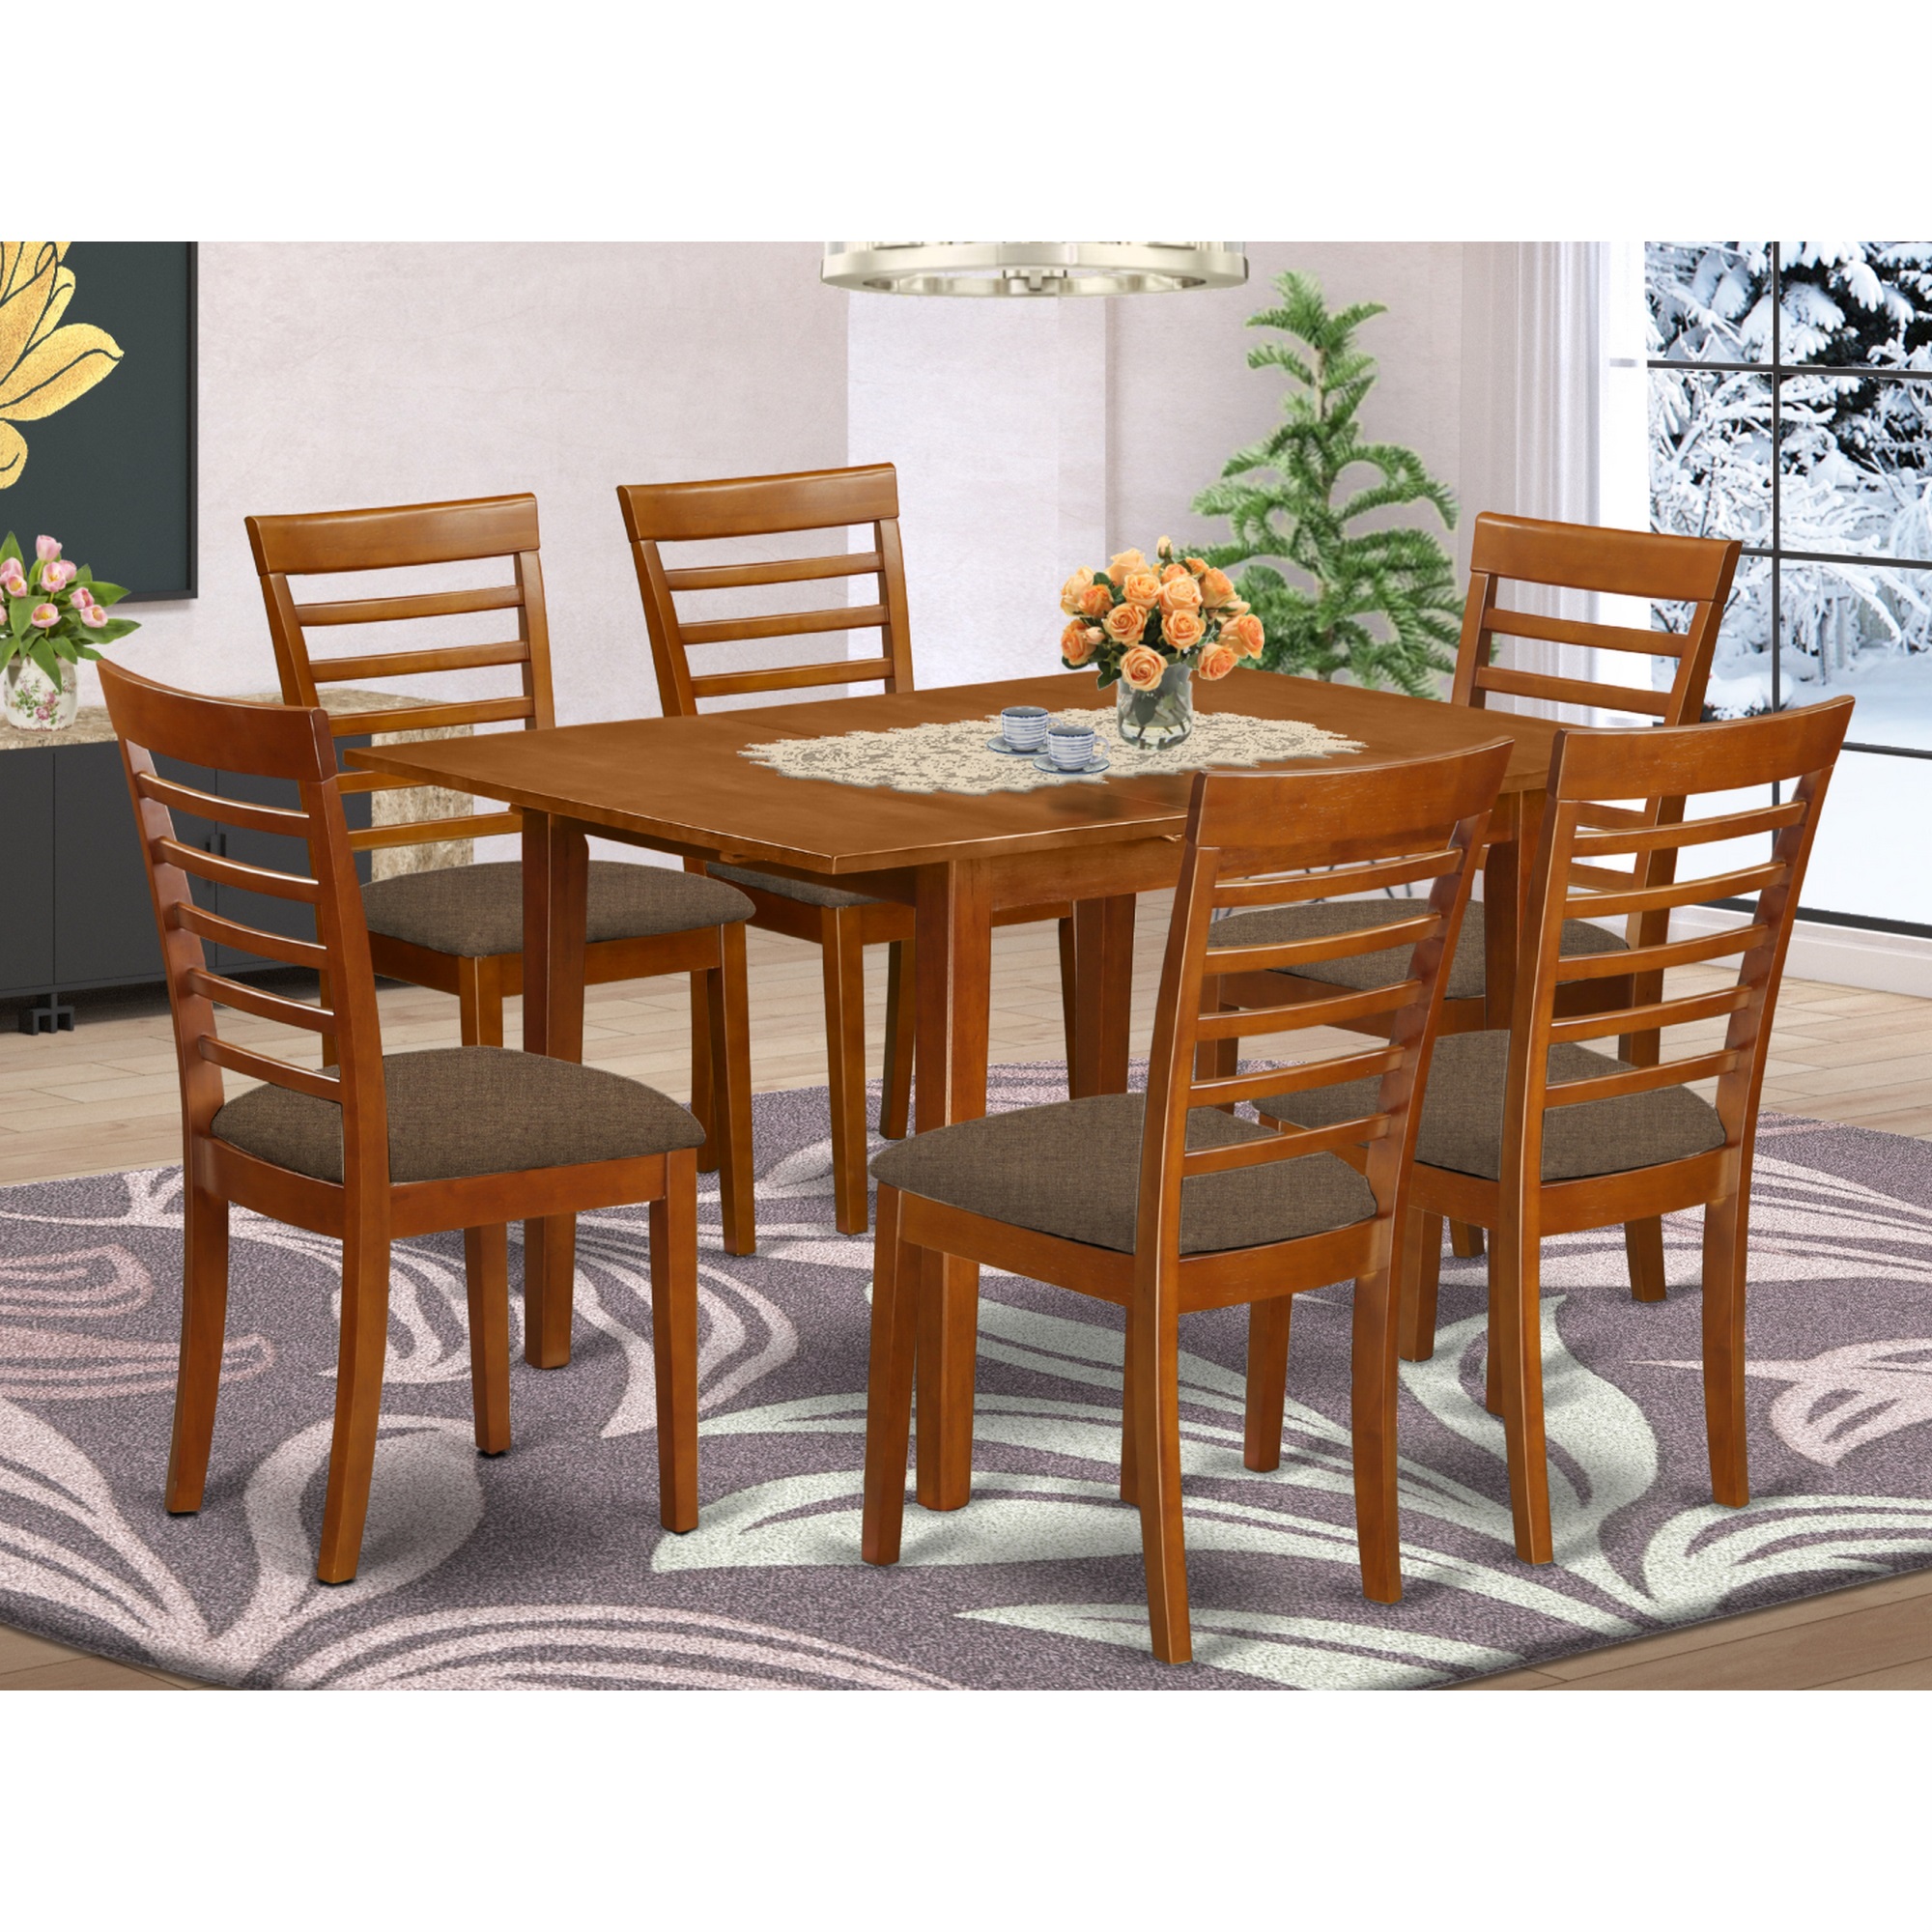 East West Furniture MILA7-SBR-C 7 Pc Kitchen nook Dining set-breakfast nook and 6 Dining Chairs in Brown